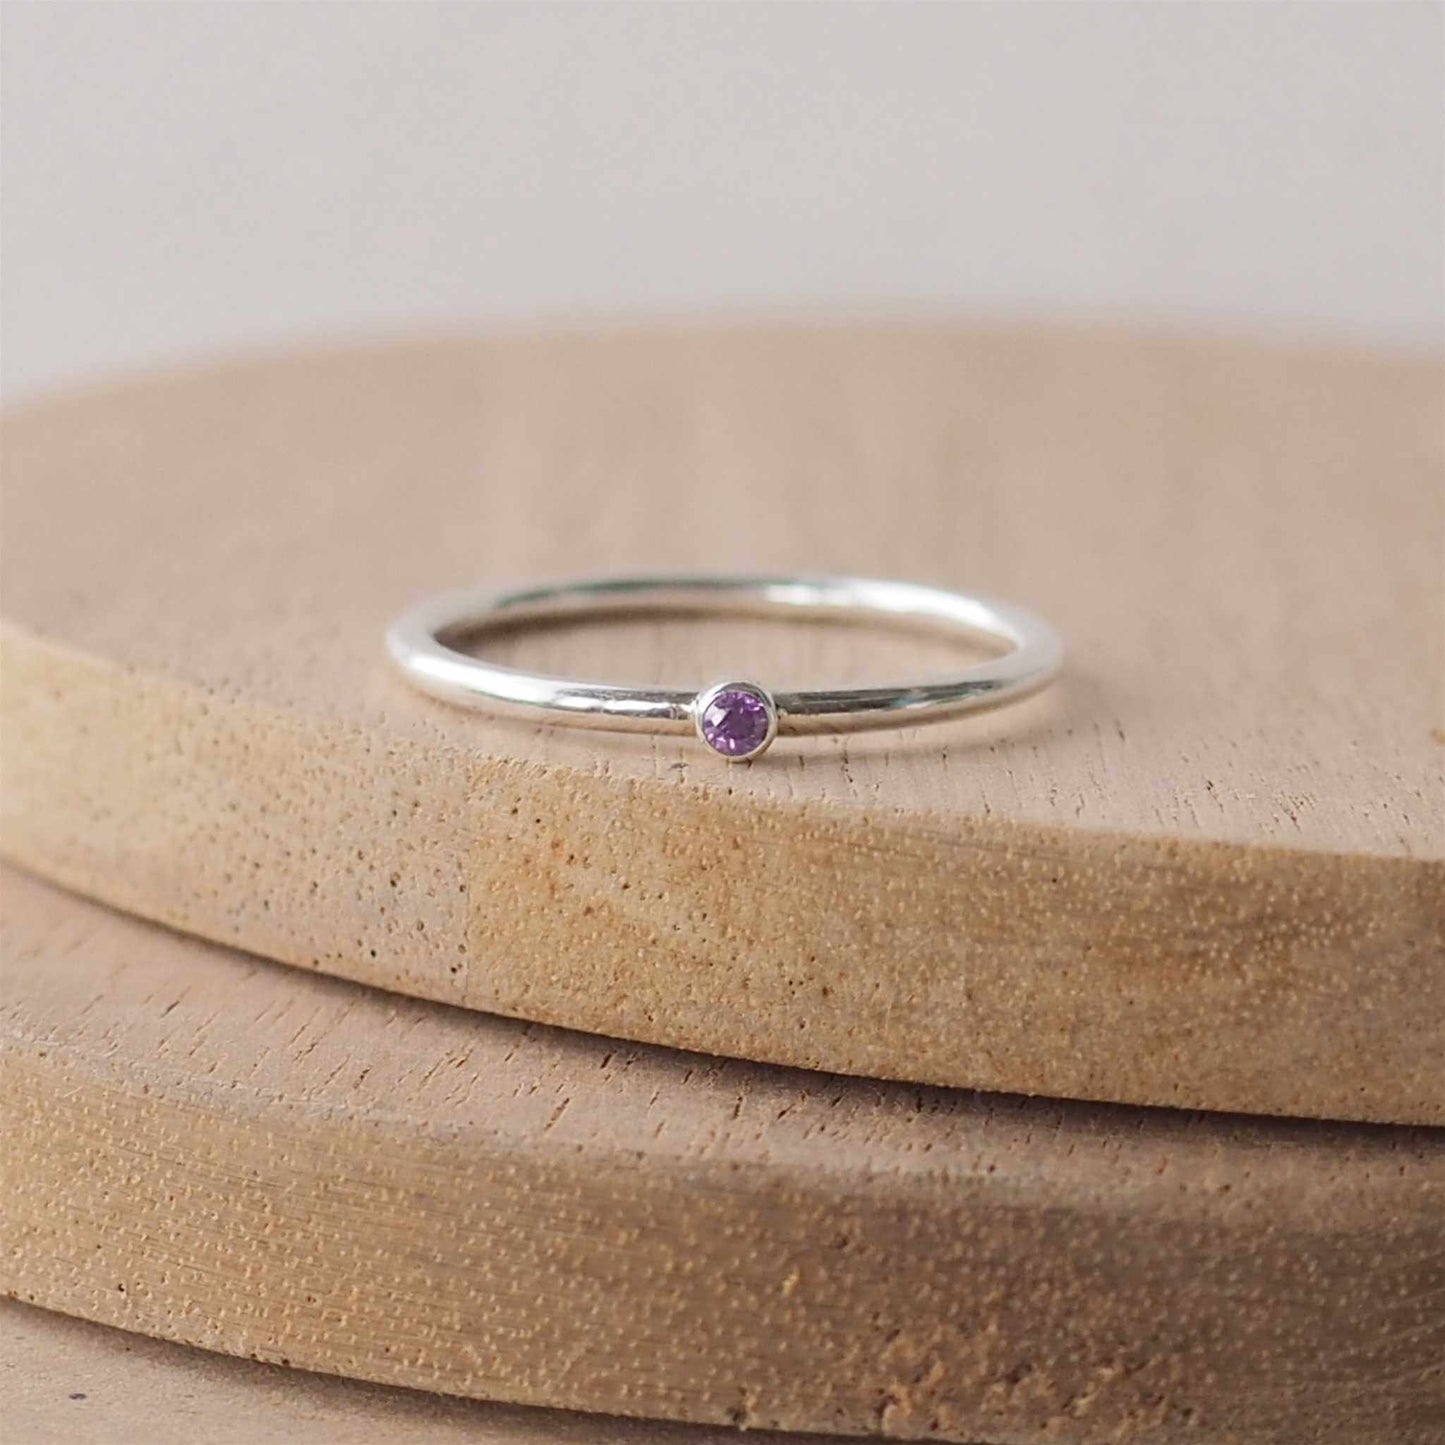 Silver ring with a purple gemstone. The ring is simple in style with no embellishment , with a round wire band 1.5mm thick with a simple Amethyst 2mm round cubic zirconia stone set in an enclosed silver setting. The gem is very small and minimal on the band.Amethyst is birthstone for February. The ring is Sterling Silver and made to your ring size. Handmade in Scotland by Maram Jewellery